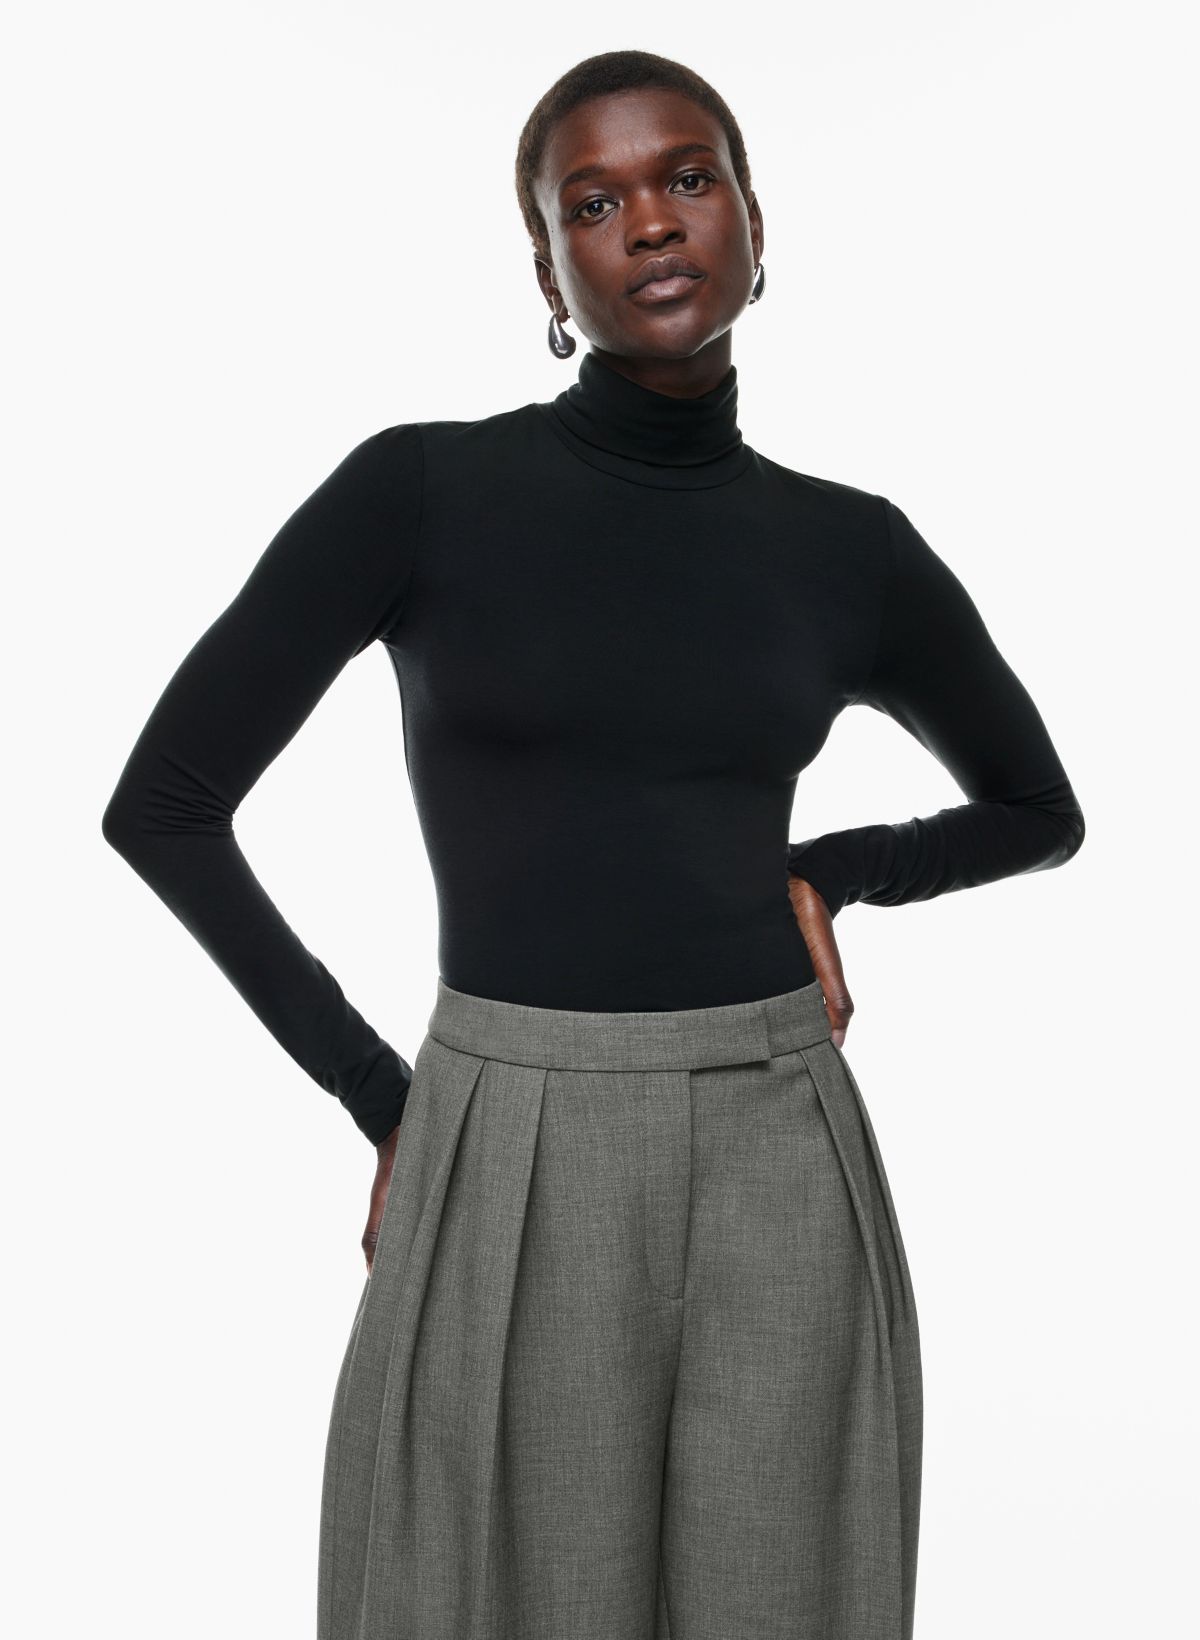 My Hunt for the Perfect Black Turtleneck Ended When I Discovered